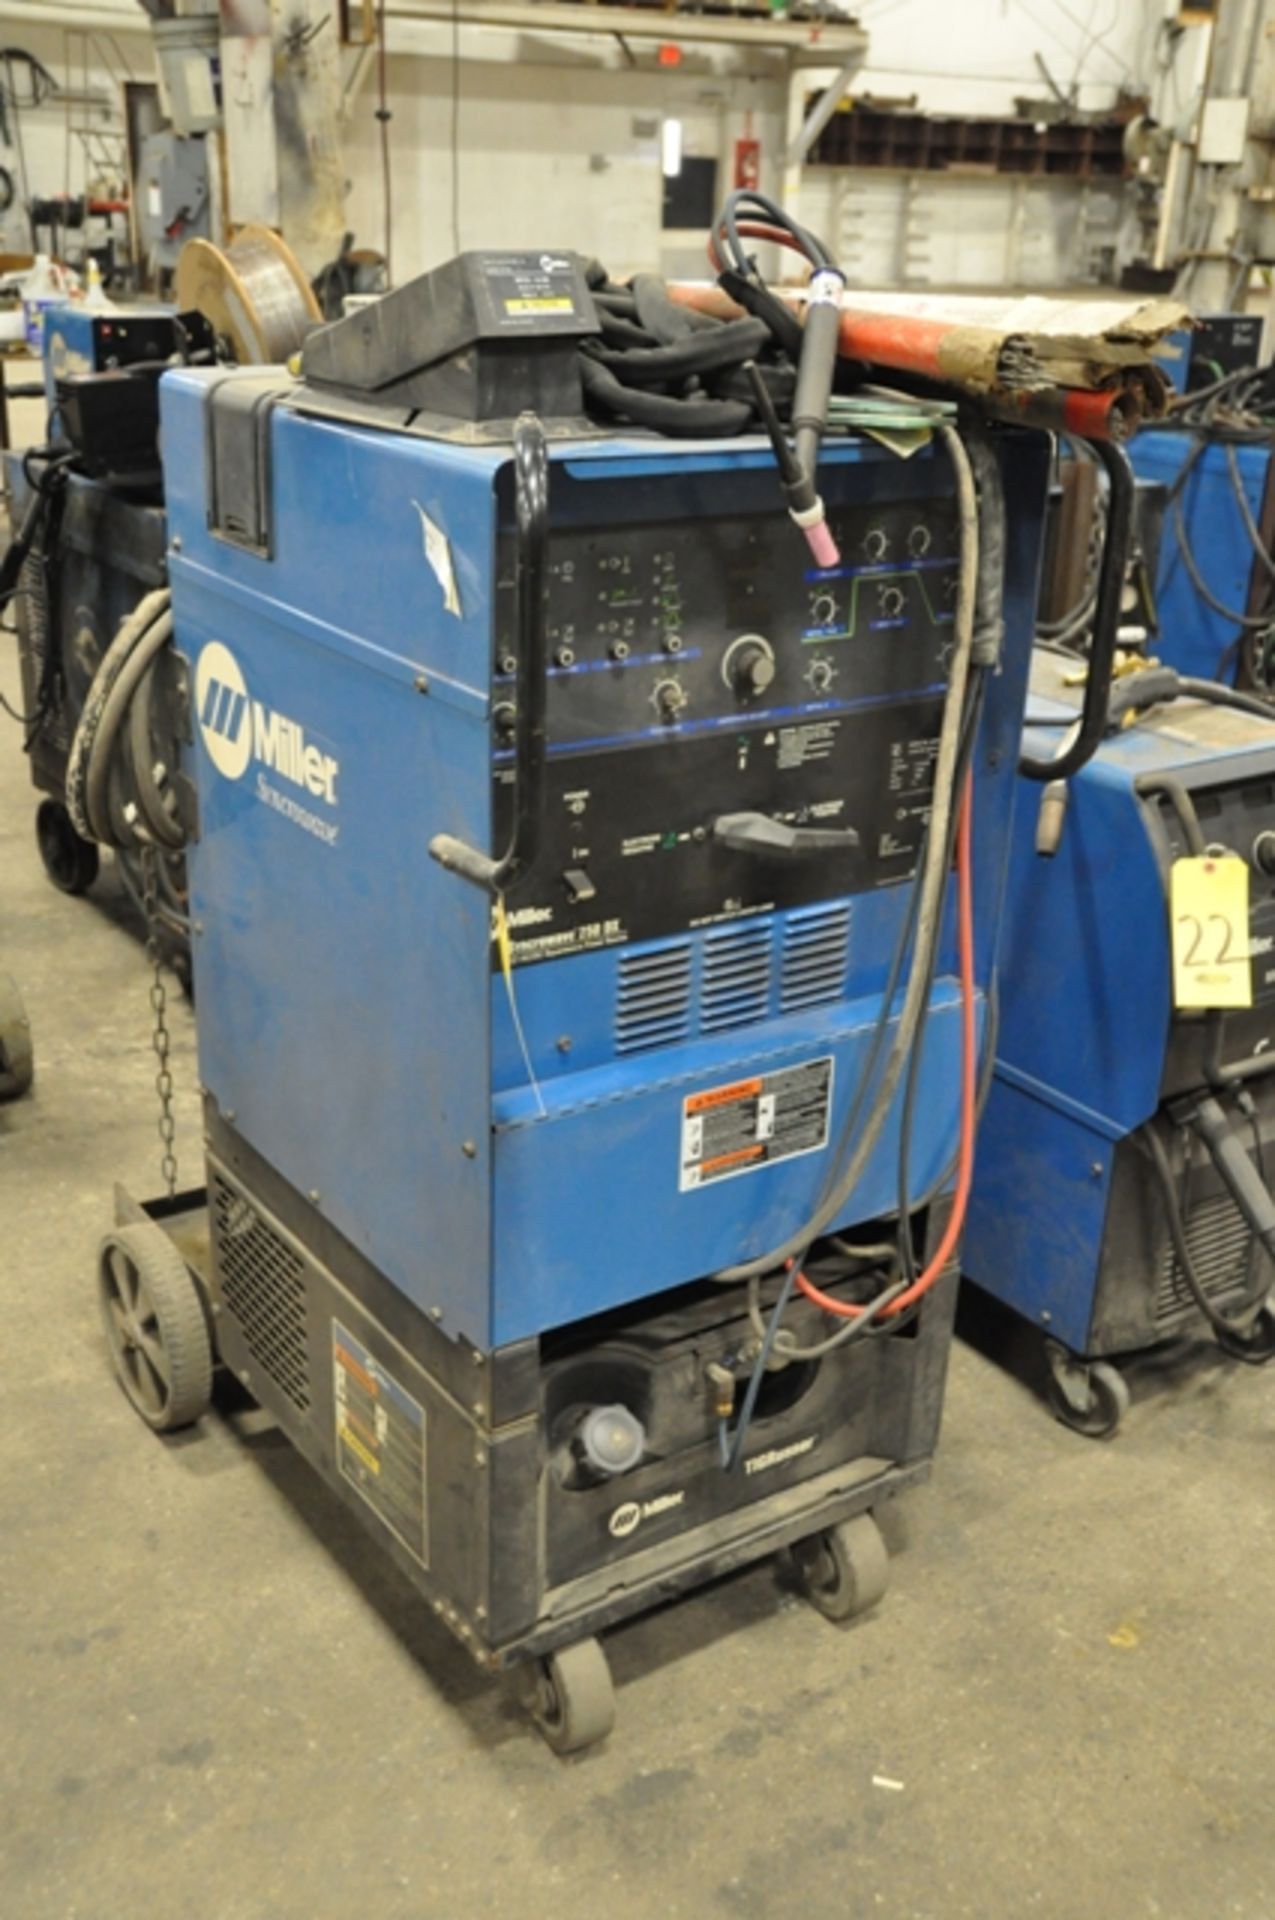 MILLER SYNCRO 250DX TIG WELDER, NEW 2001, SN. LB240786, SINGLE PHASE WITH TIG GUN, WATER COOLER UNIT - Image 2 of 6